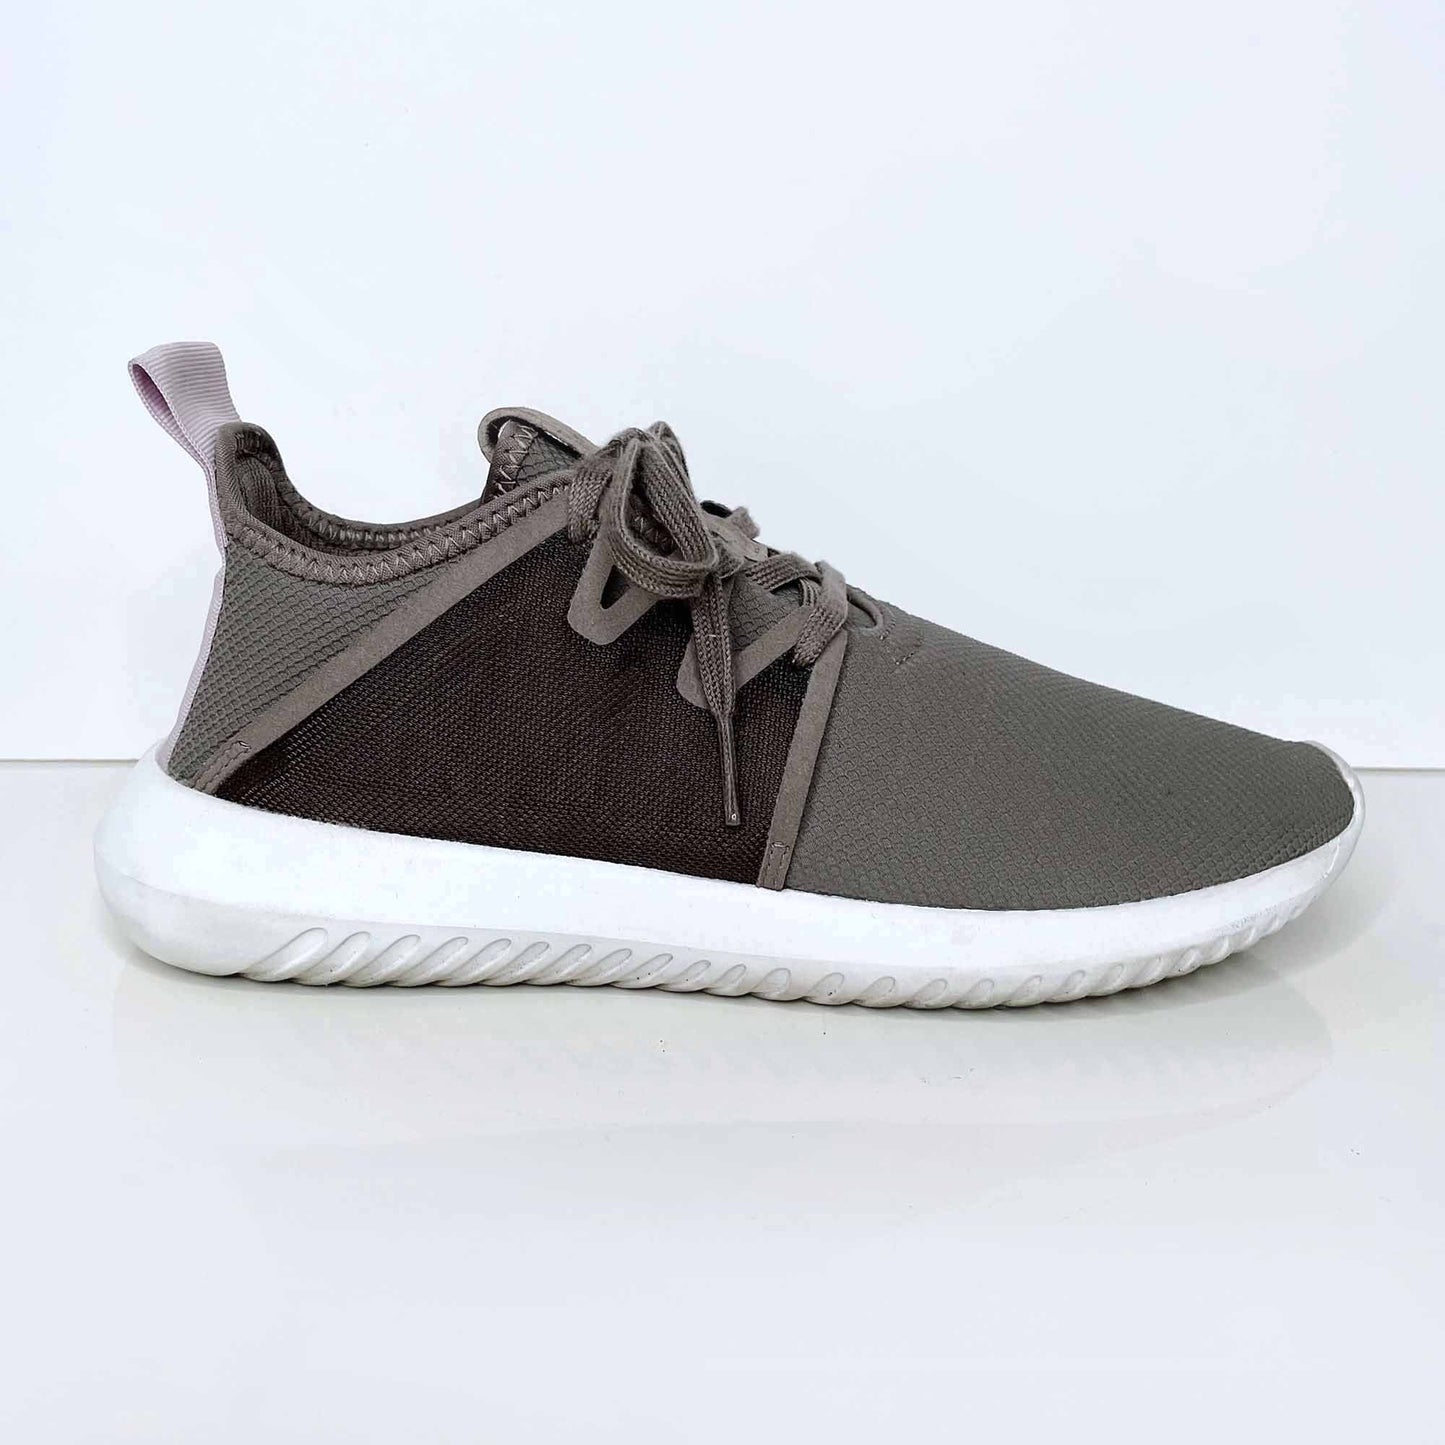 adidas tubular viral 2.0 two tone sneakers - size 7